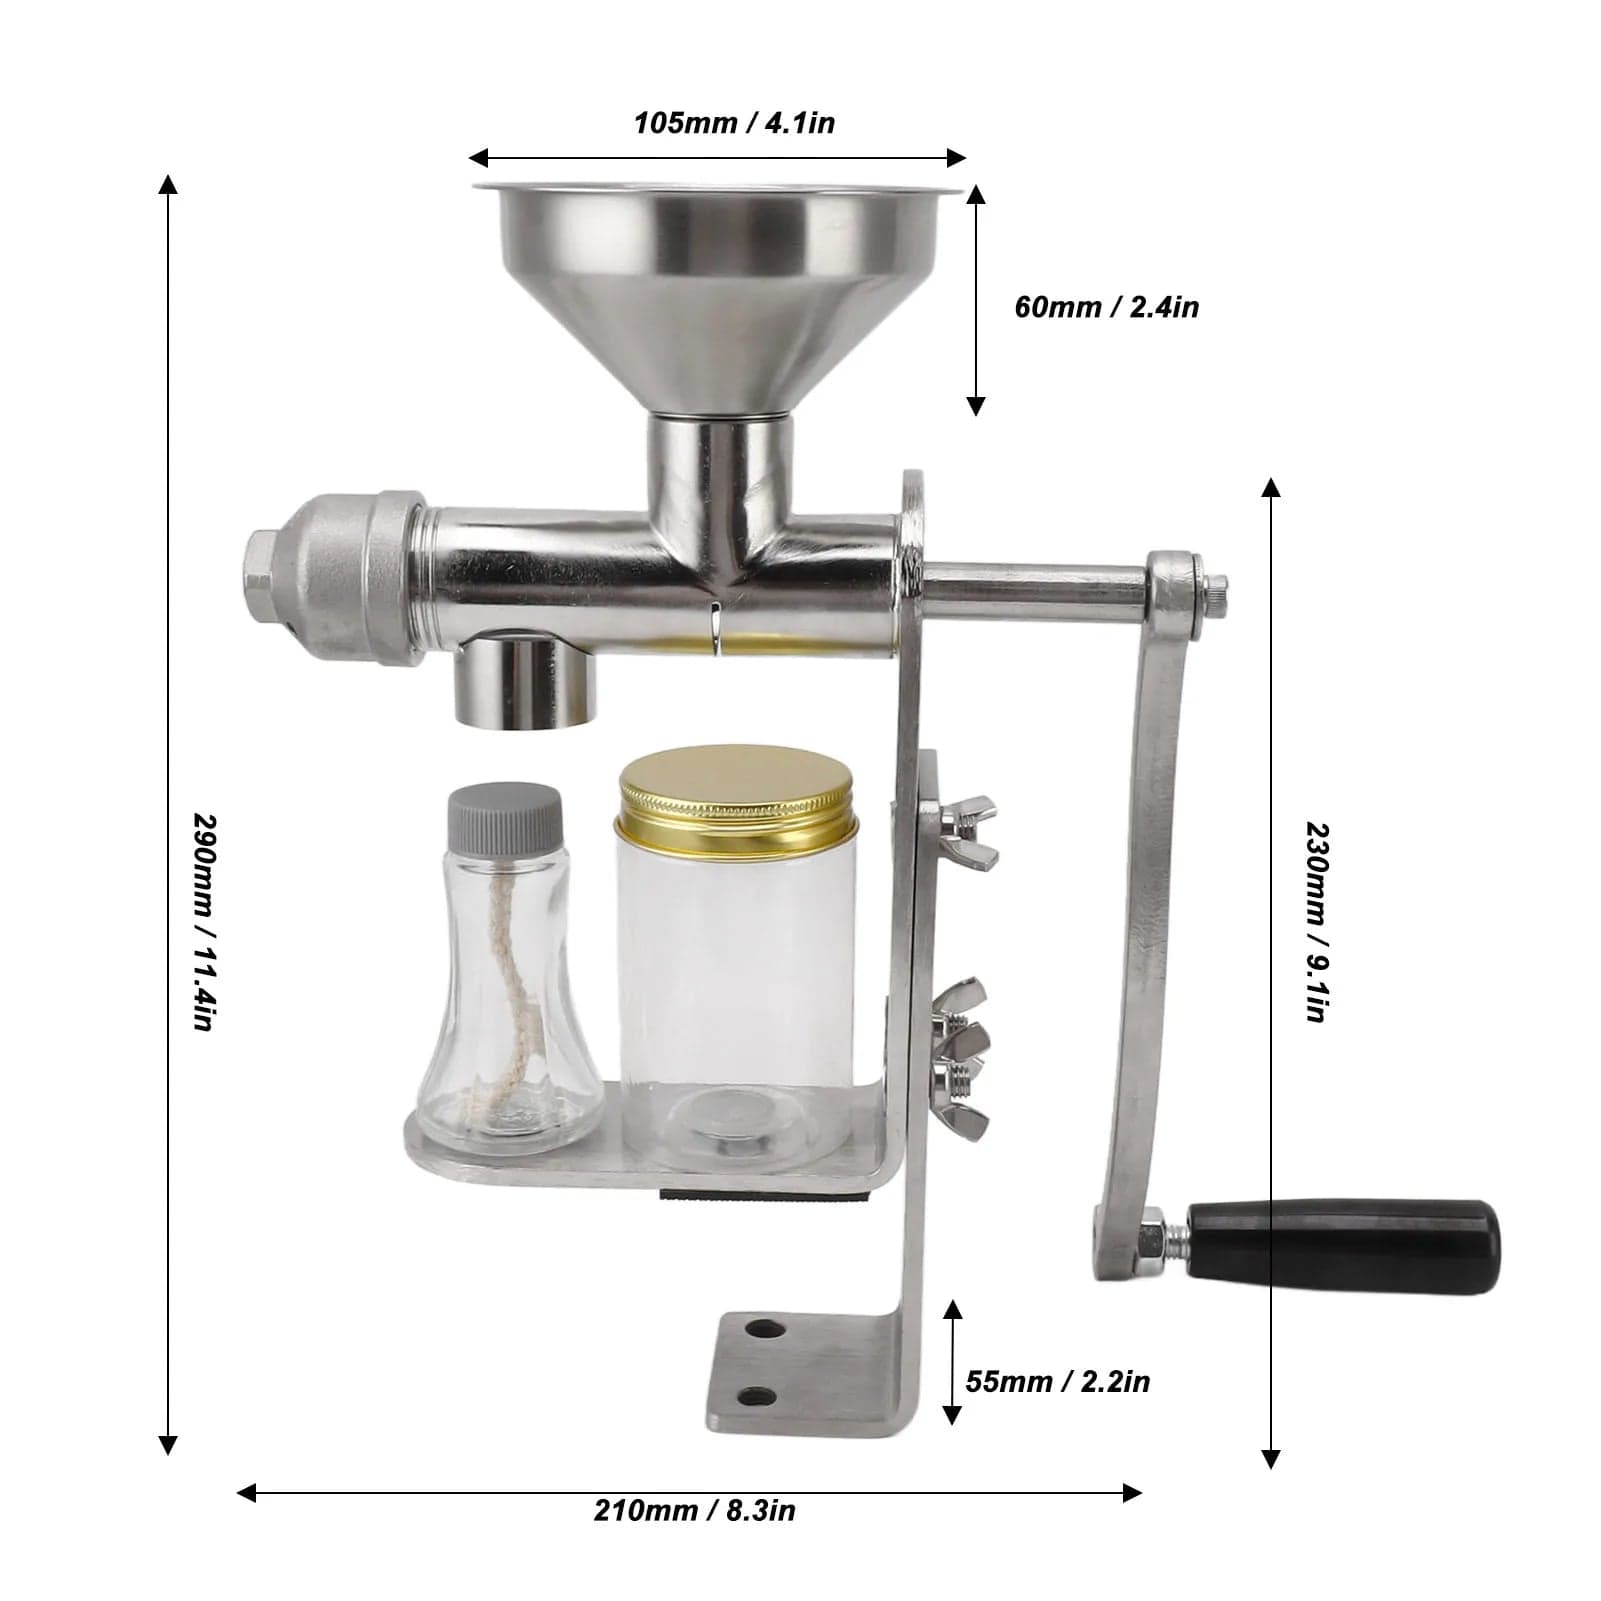 HomeBound Essentials Manual Oil Press Machine - Stainless Steel Cold and Hot Press Oil Maker for Nuts & Seeds